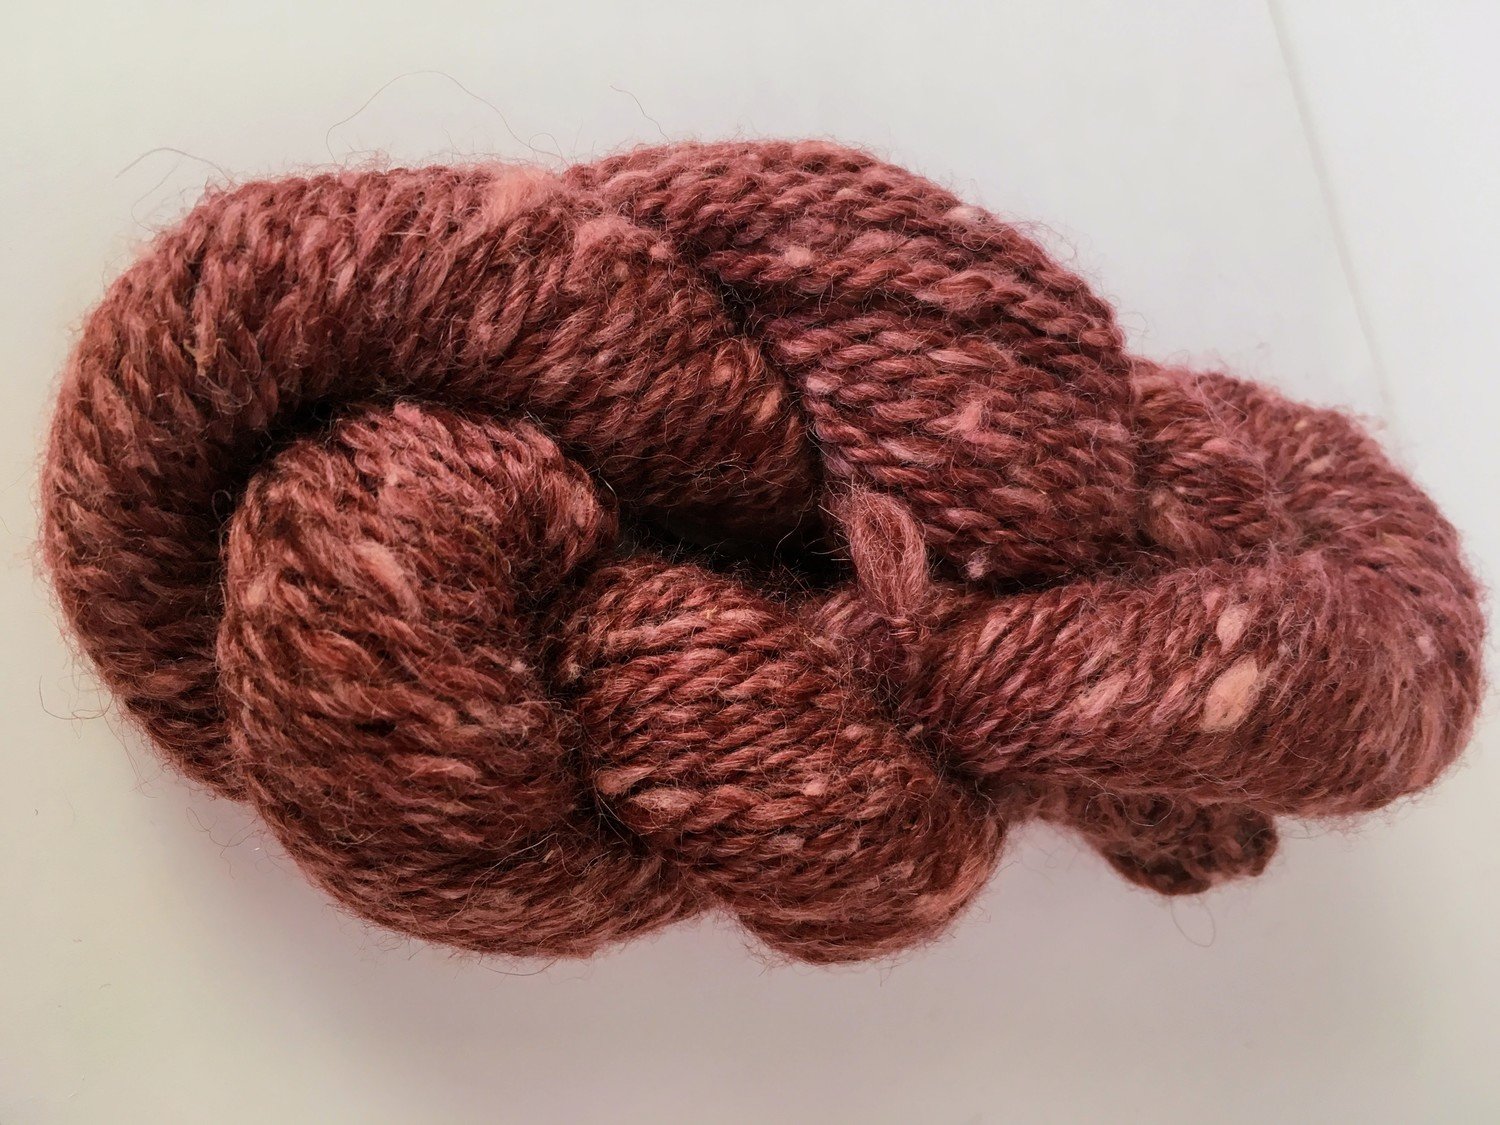 Breezy Hill Cottage-Milled, Hand-Dyed Yarn - Wine